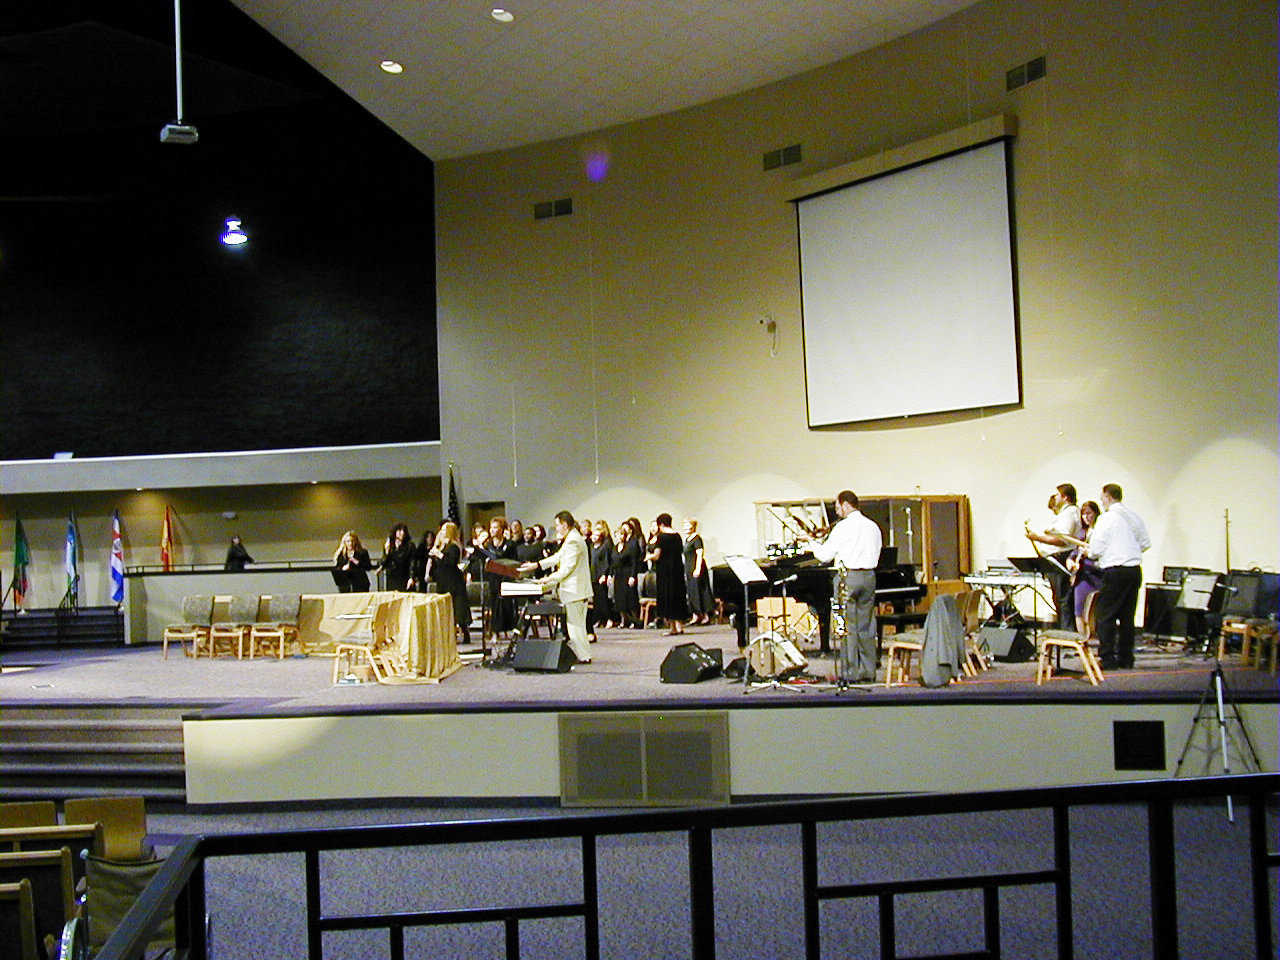 They love it! — Musicians and choir members love their new sanctuary and stage.